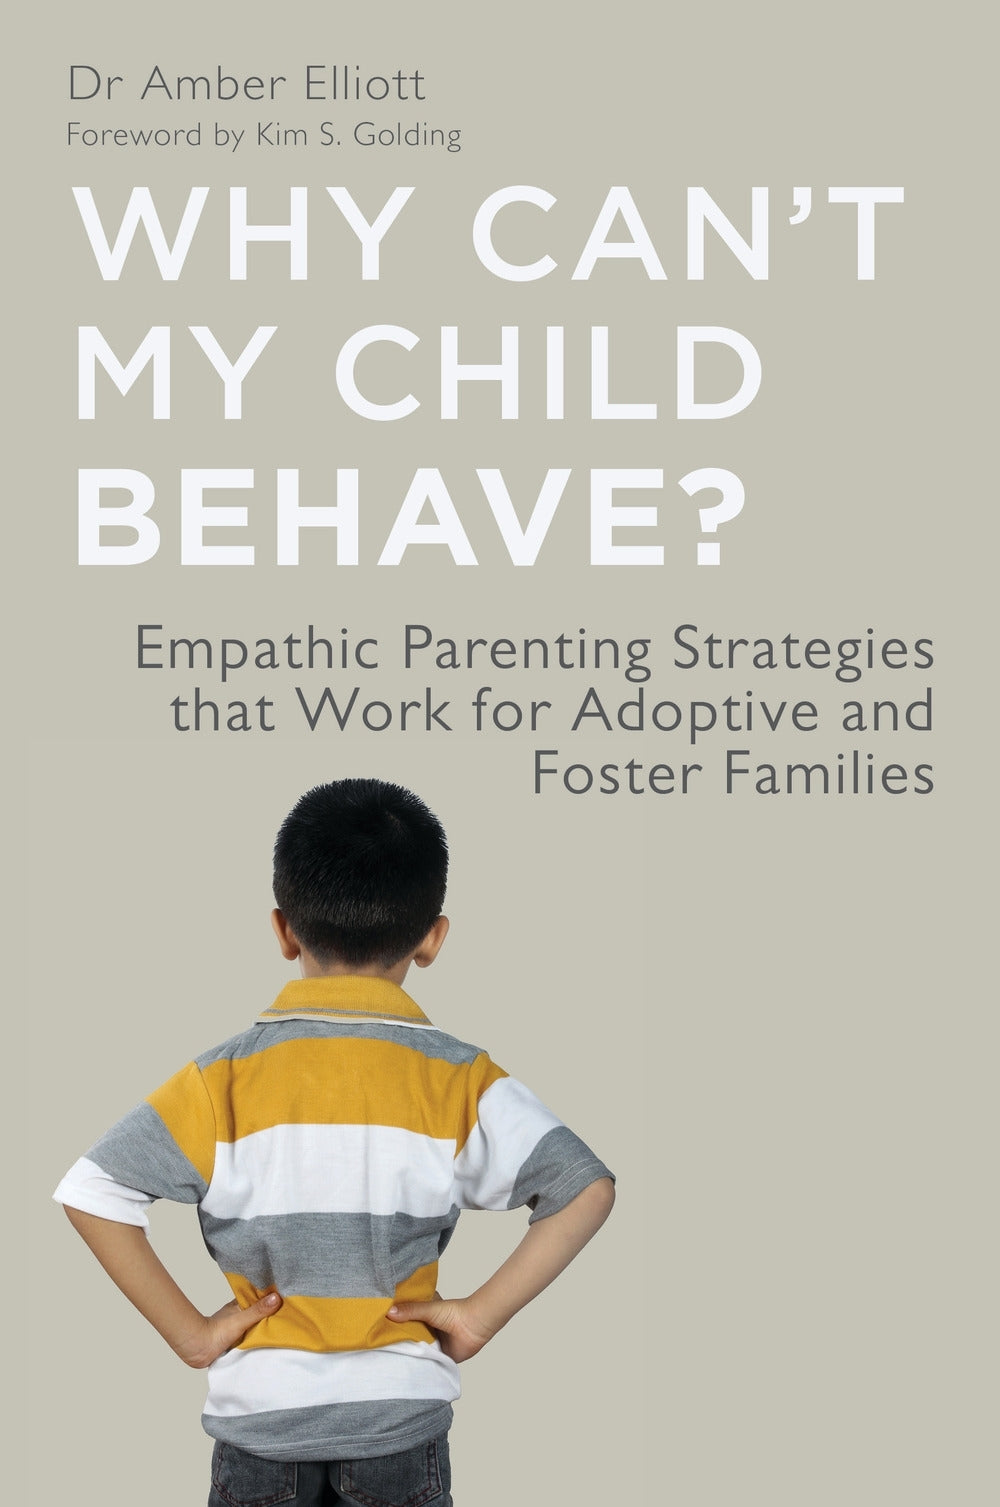 Why Can't My Child Behave? by Amber Elliott